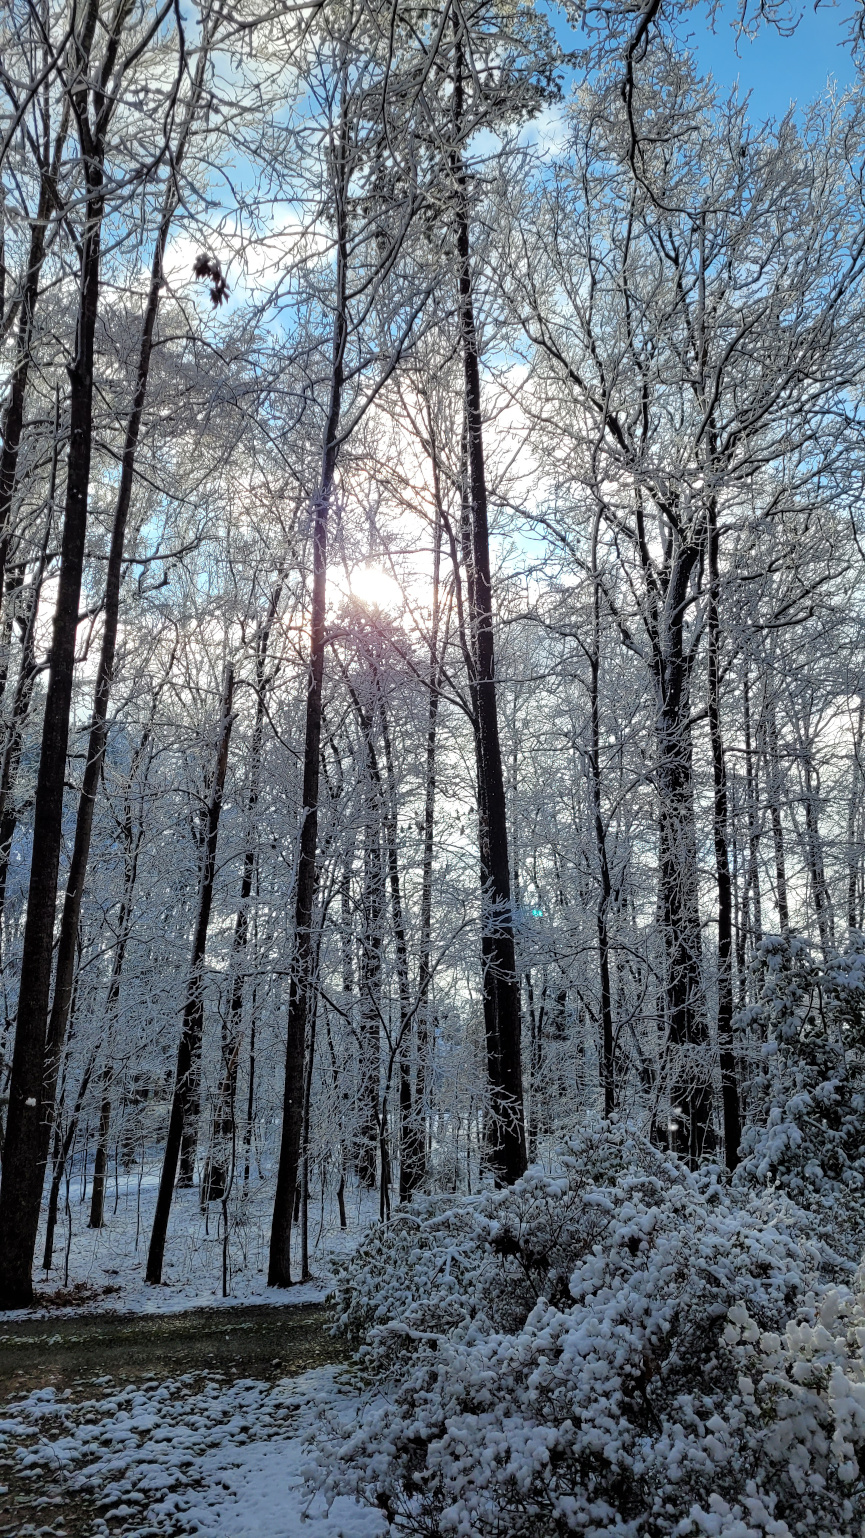 Sun comes through snow-covered branches